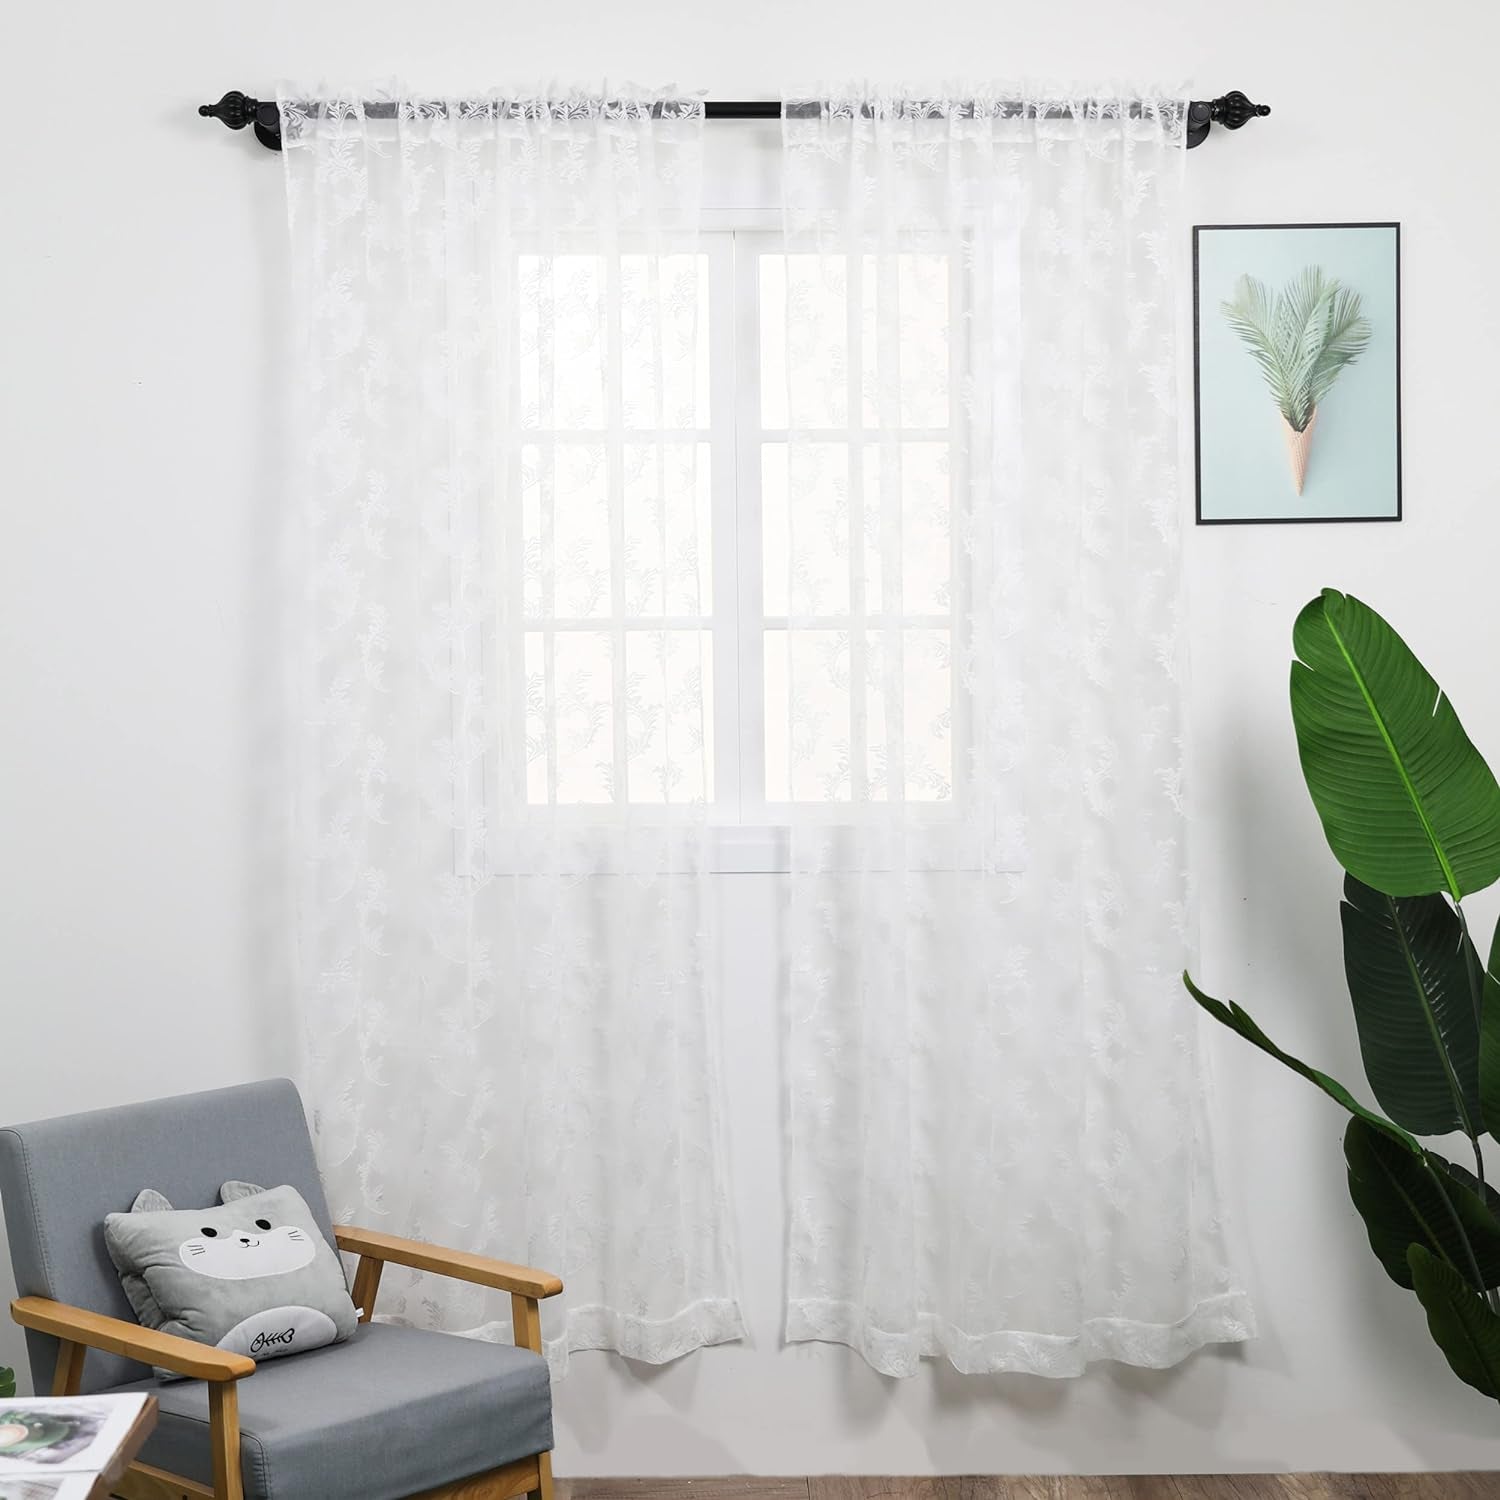 Rloncomix Grey Sheer Curtains Decorative Leaves Knitted Textured Rod Pocket Semi Light Filtering Airy Window Drapes for Bedroom Kitchen, 52 X 63 Inch, 2 Panels  BAIHT HOME White 52"W X 72"L | 2 Pcs 